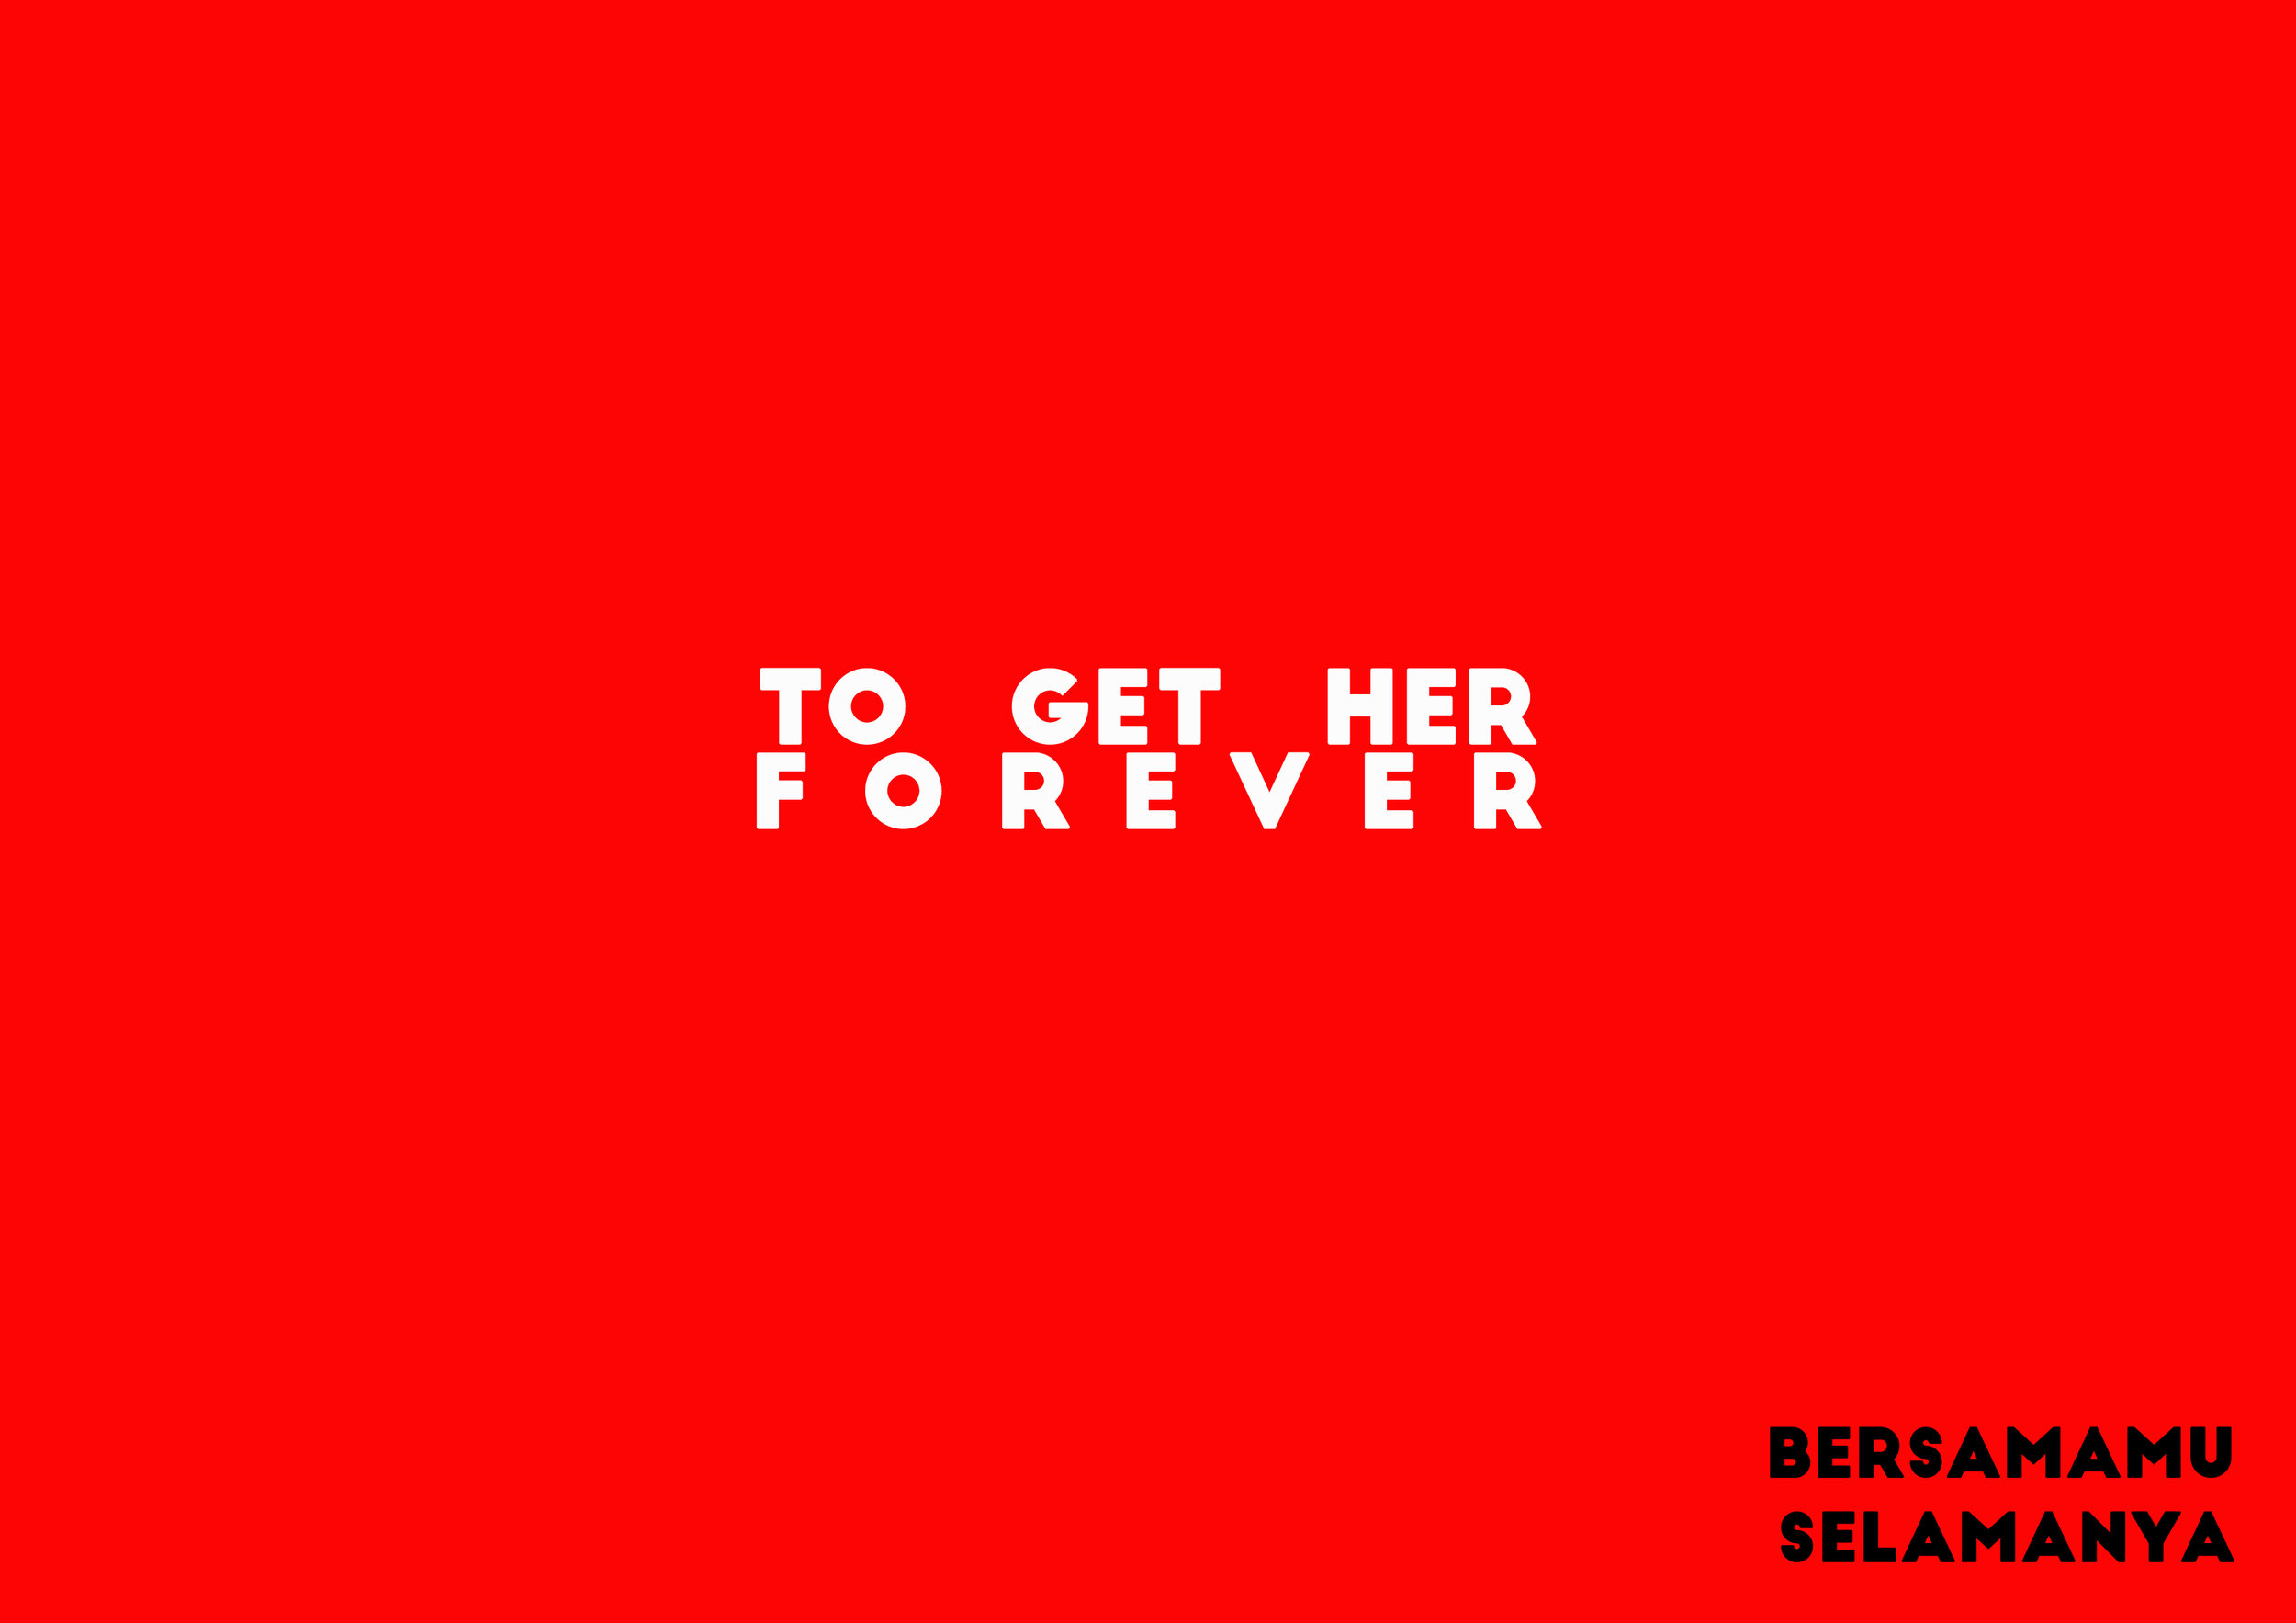 01_To get her forever.jpg